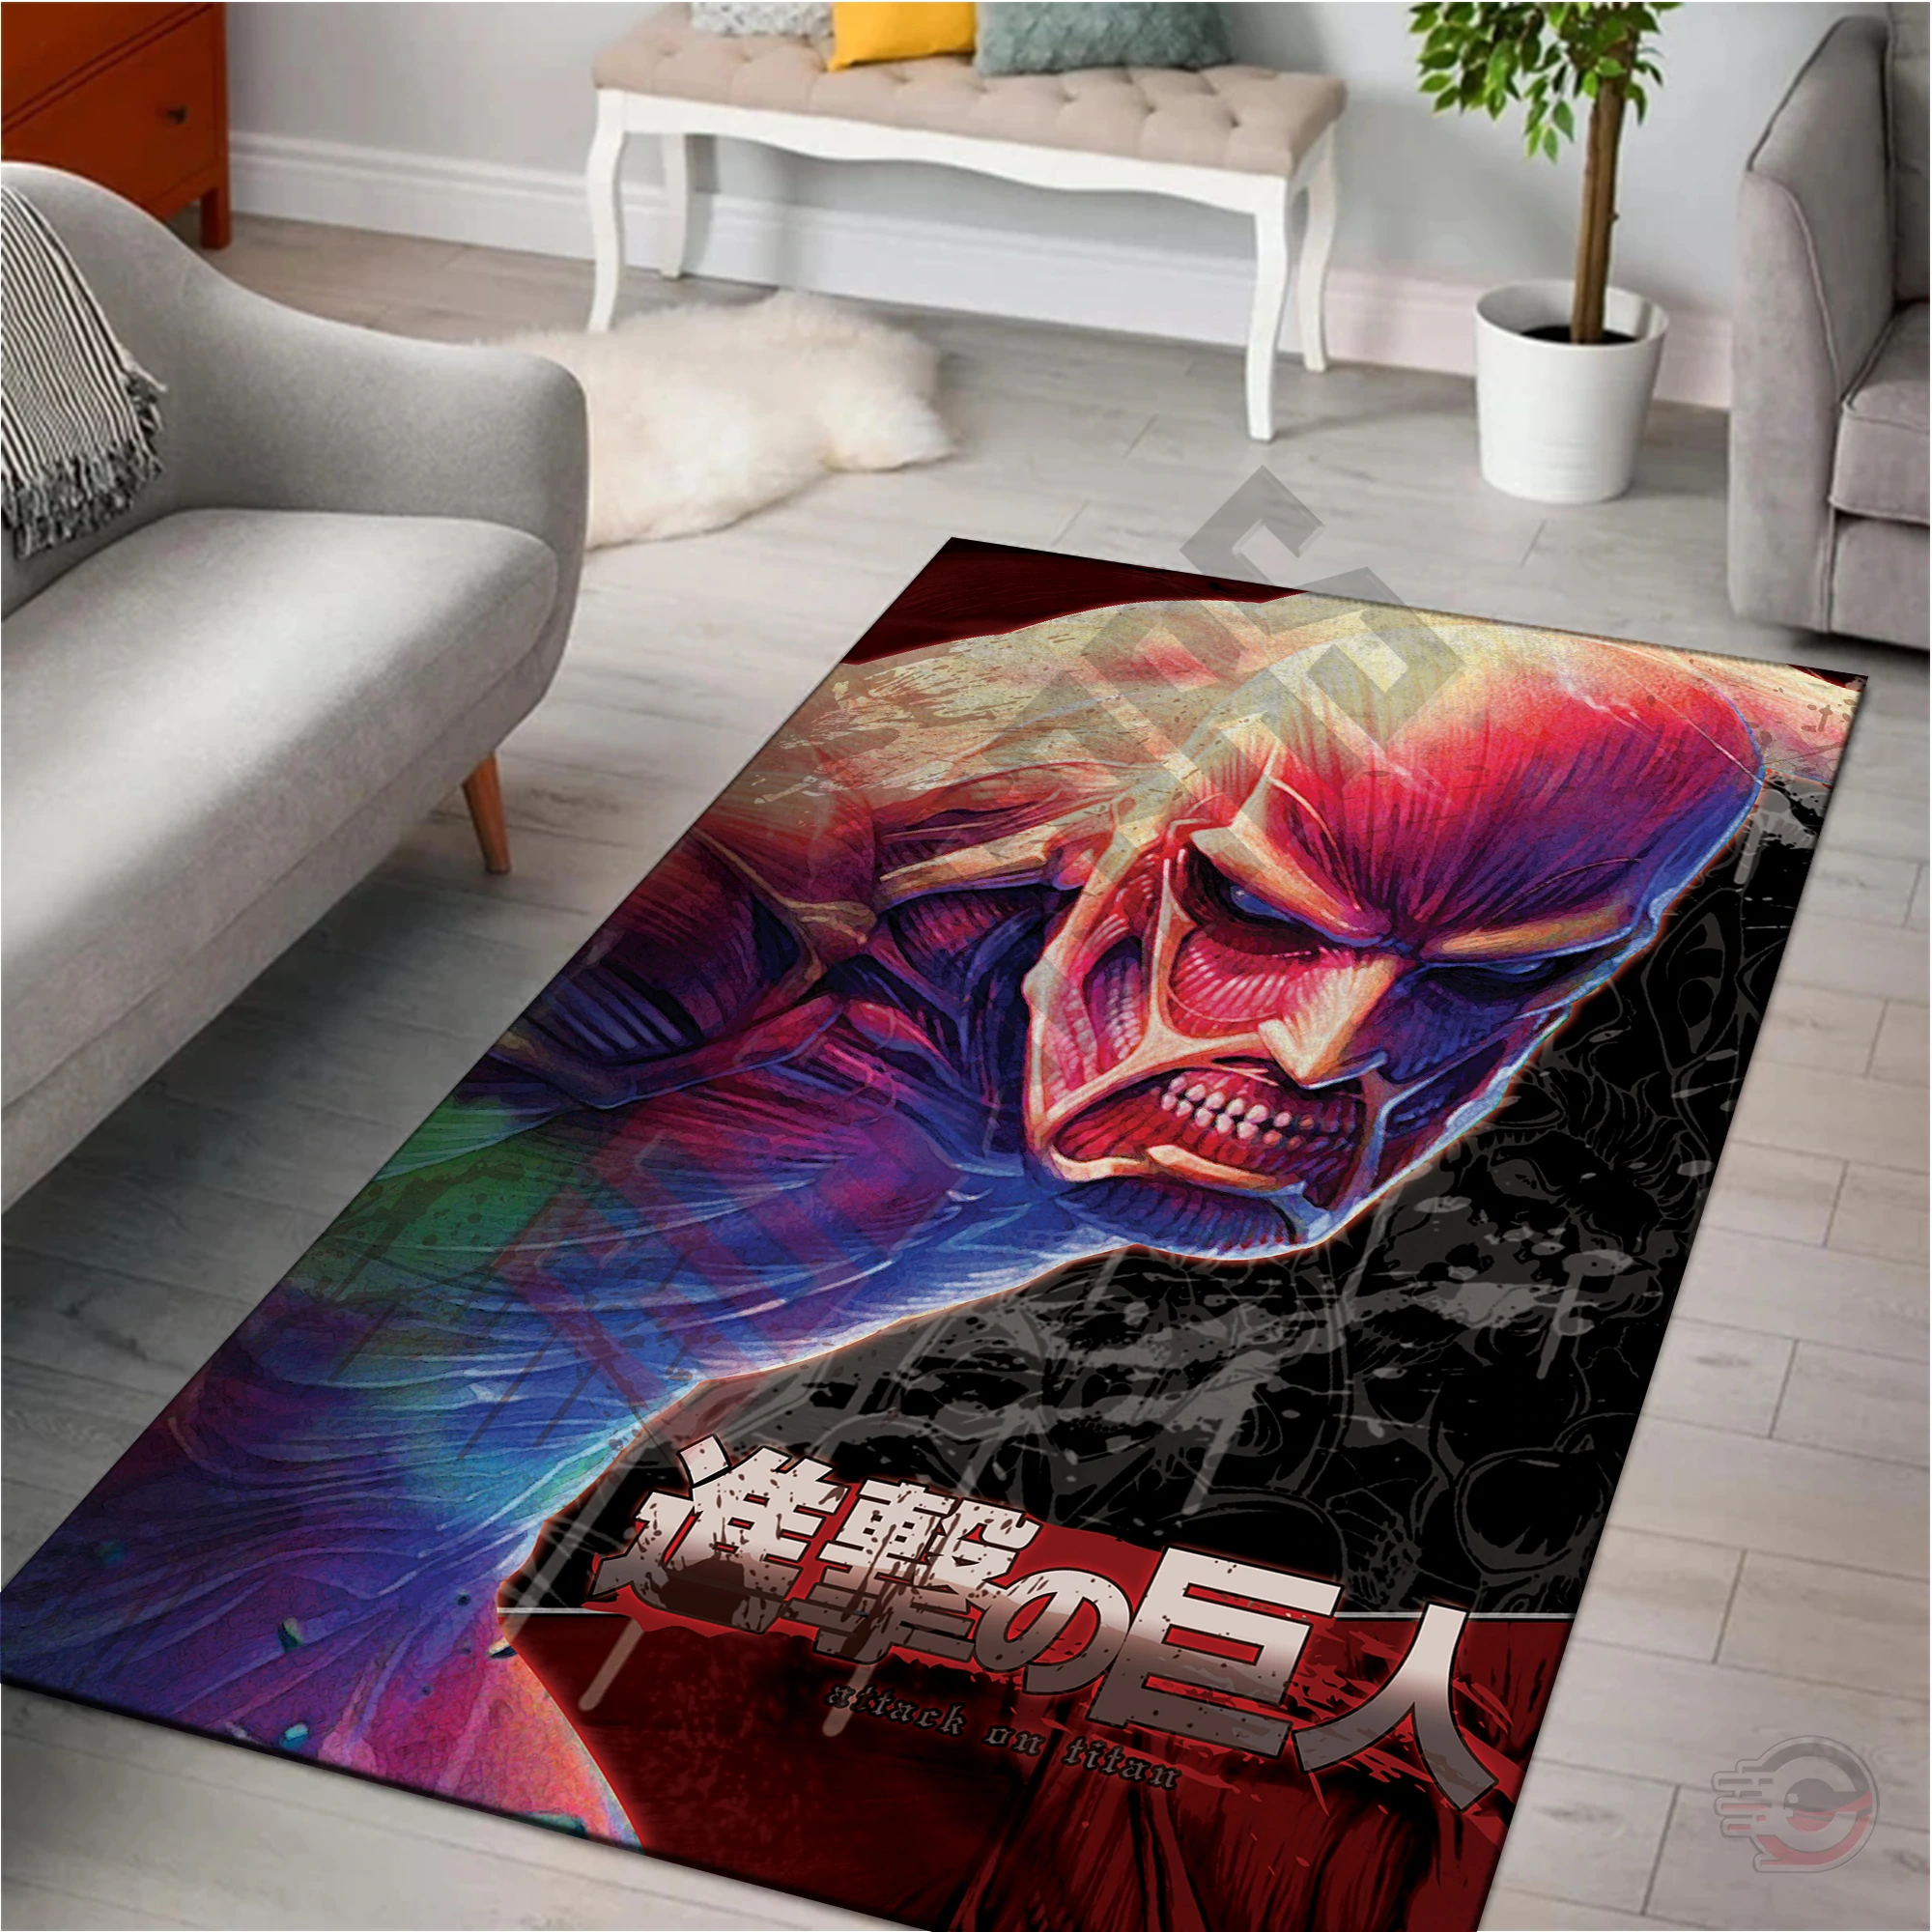 ATTACK ON TITAN : COLOSSUS RUG – CUSTOM SIZE AND PRINTING